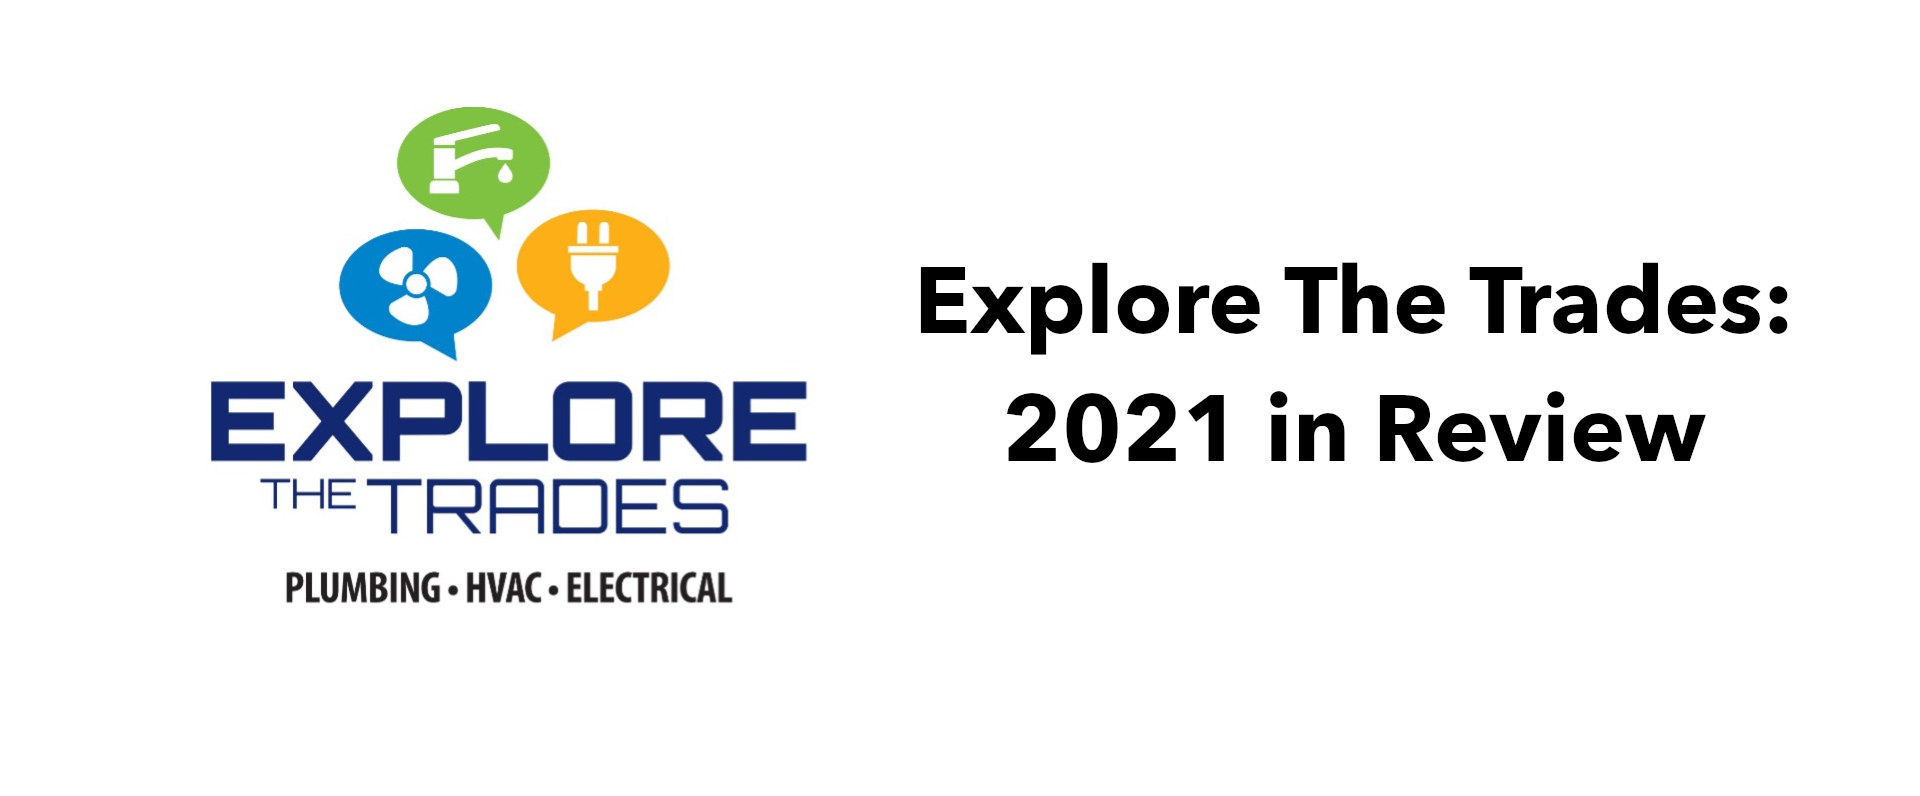 Explore The Trades: 2021 in Review featured image